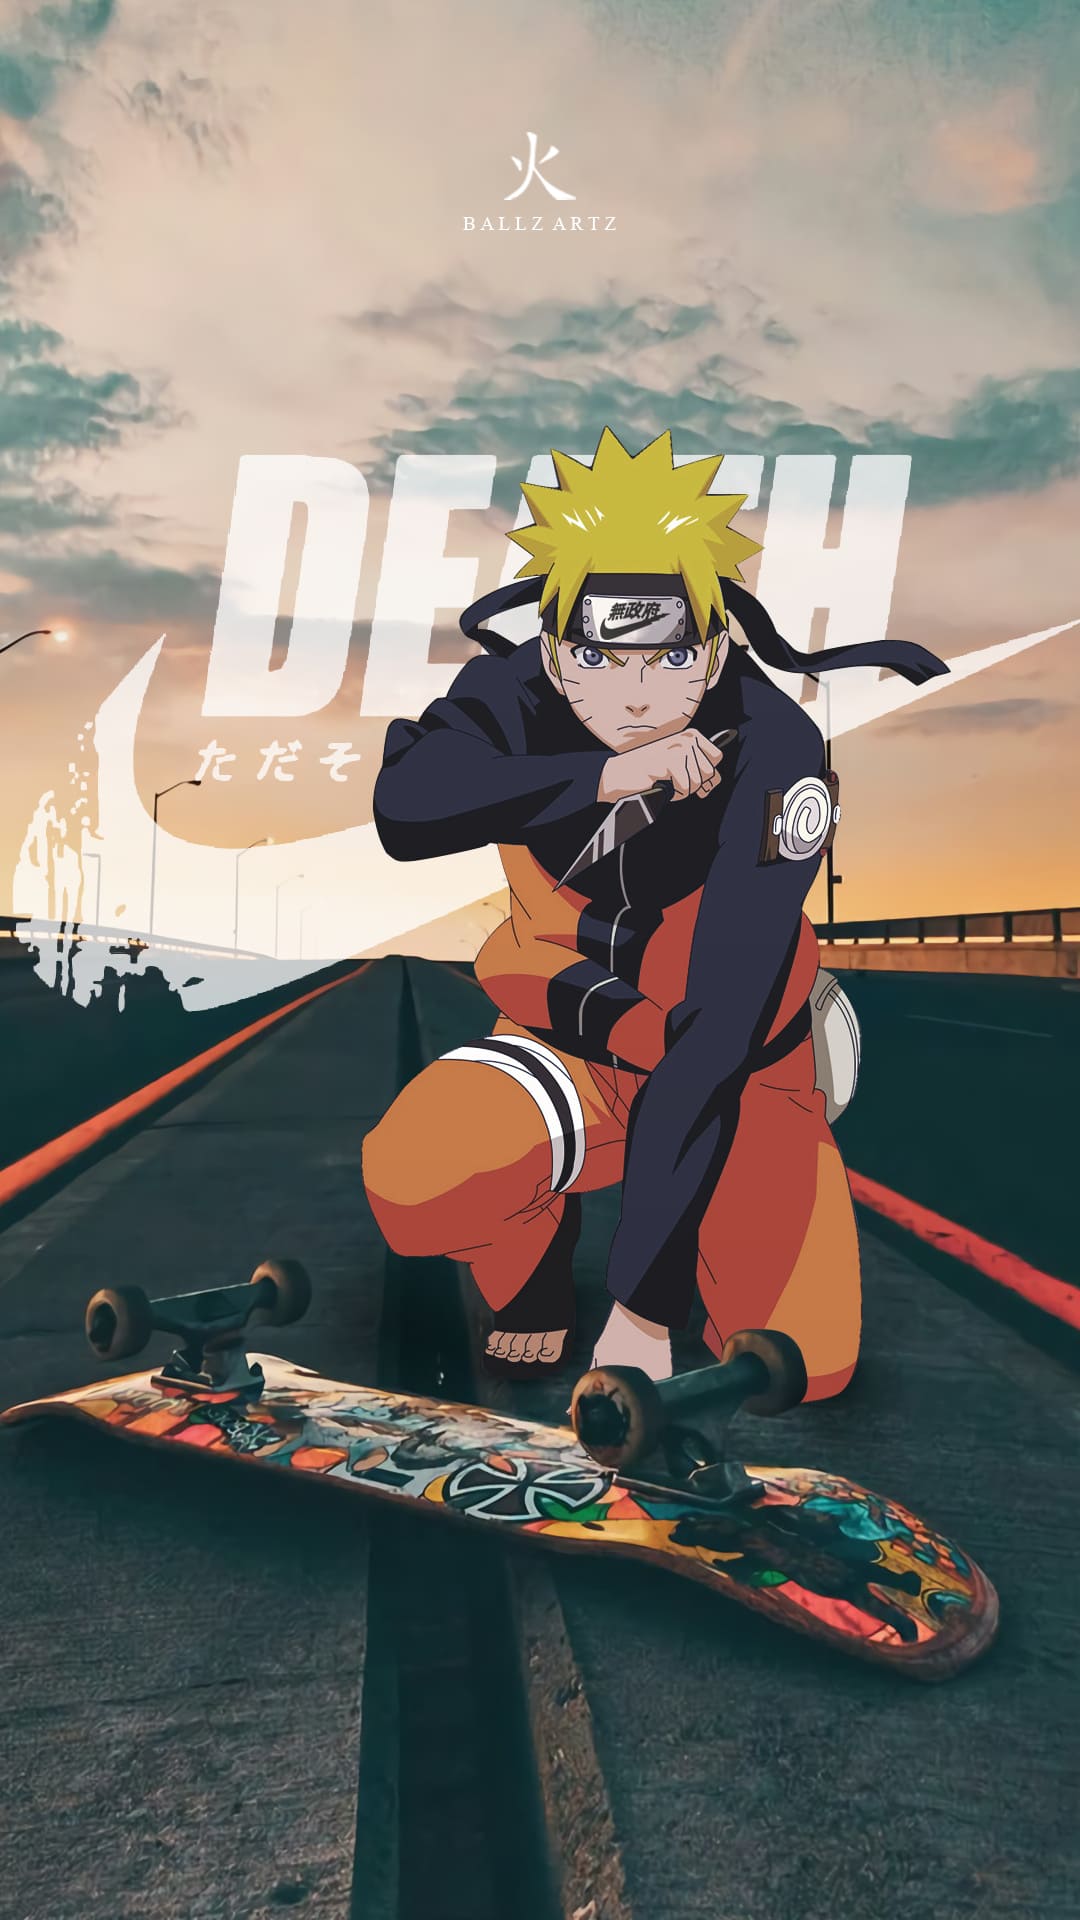 Cool Wallpapers HD for Naruto by Hieu Chau